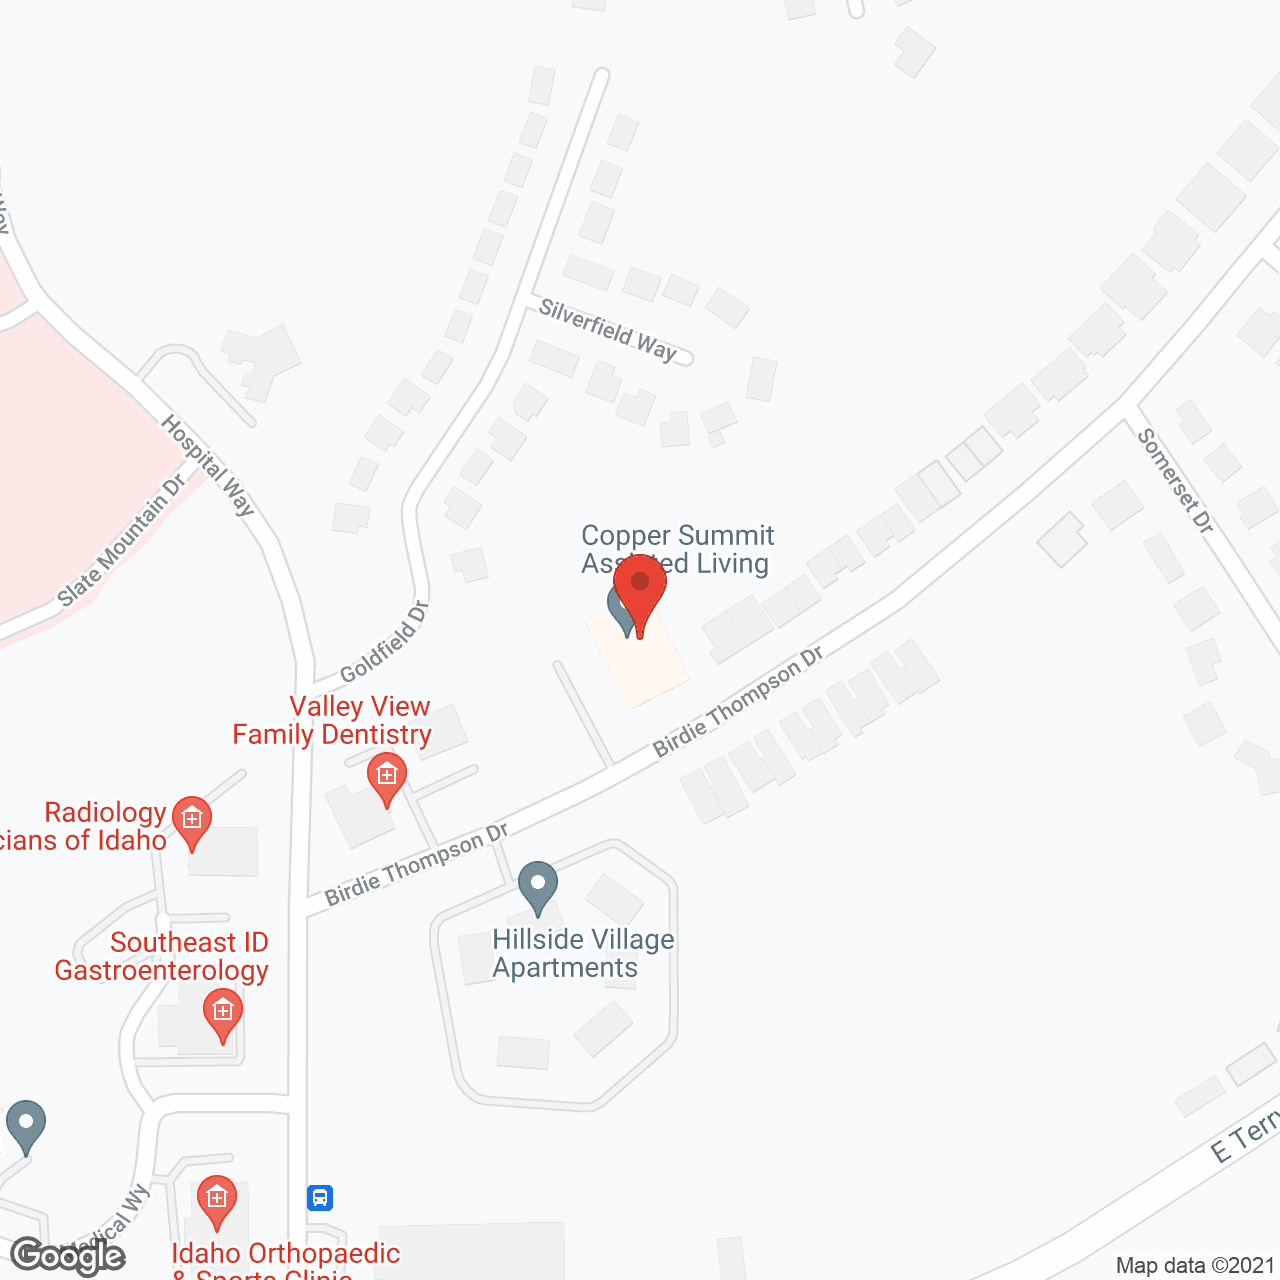 Copper Summit Assisted Living in google map